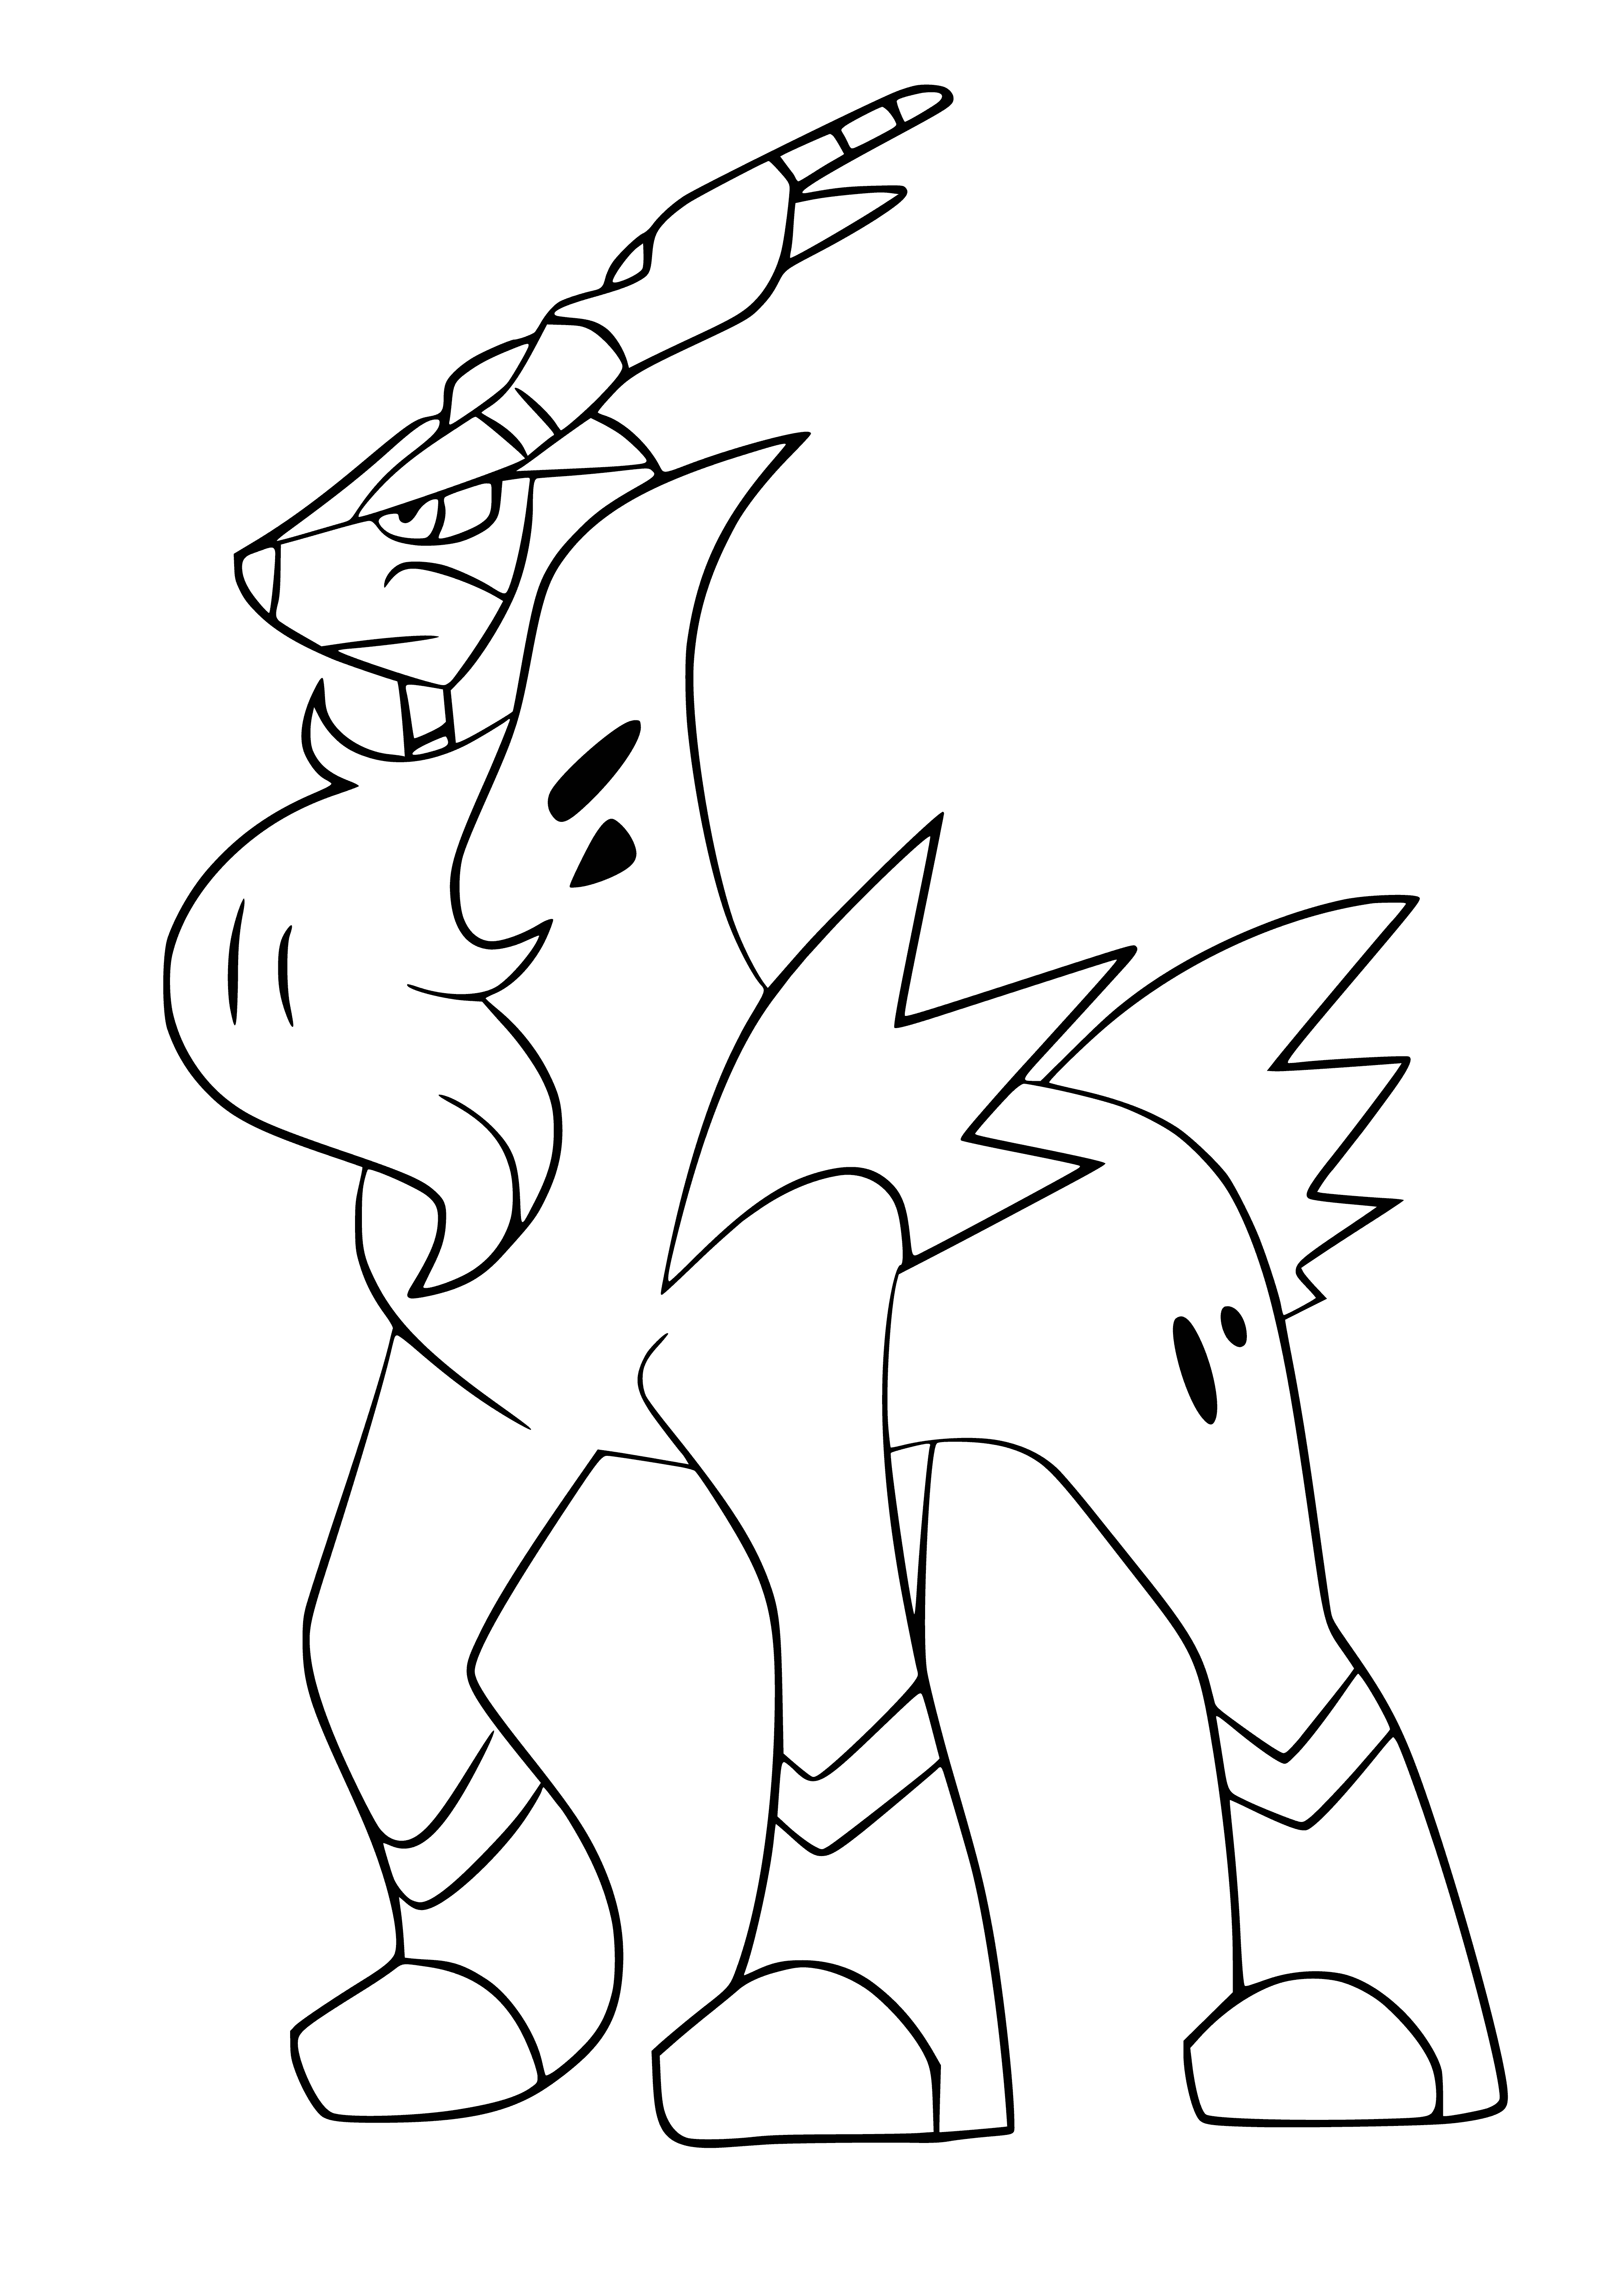 Legendary Pokemon Cobalion coloring page